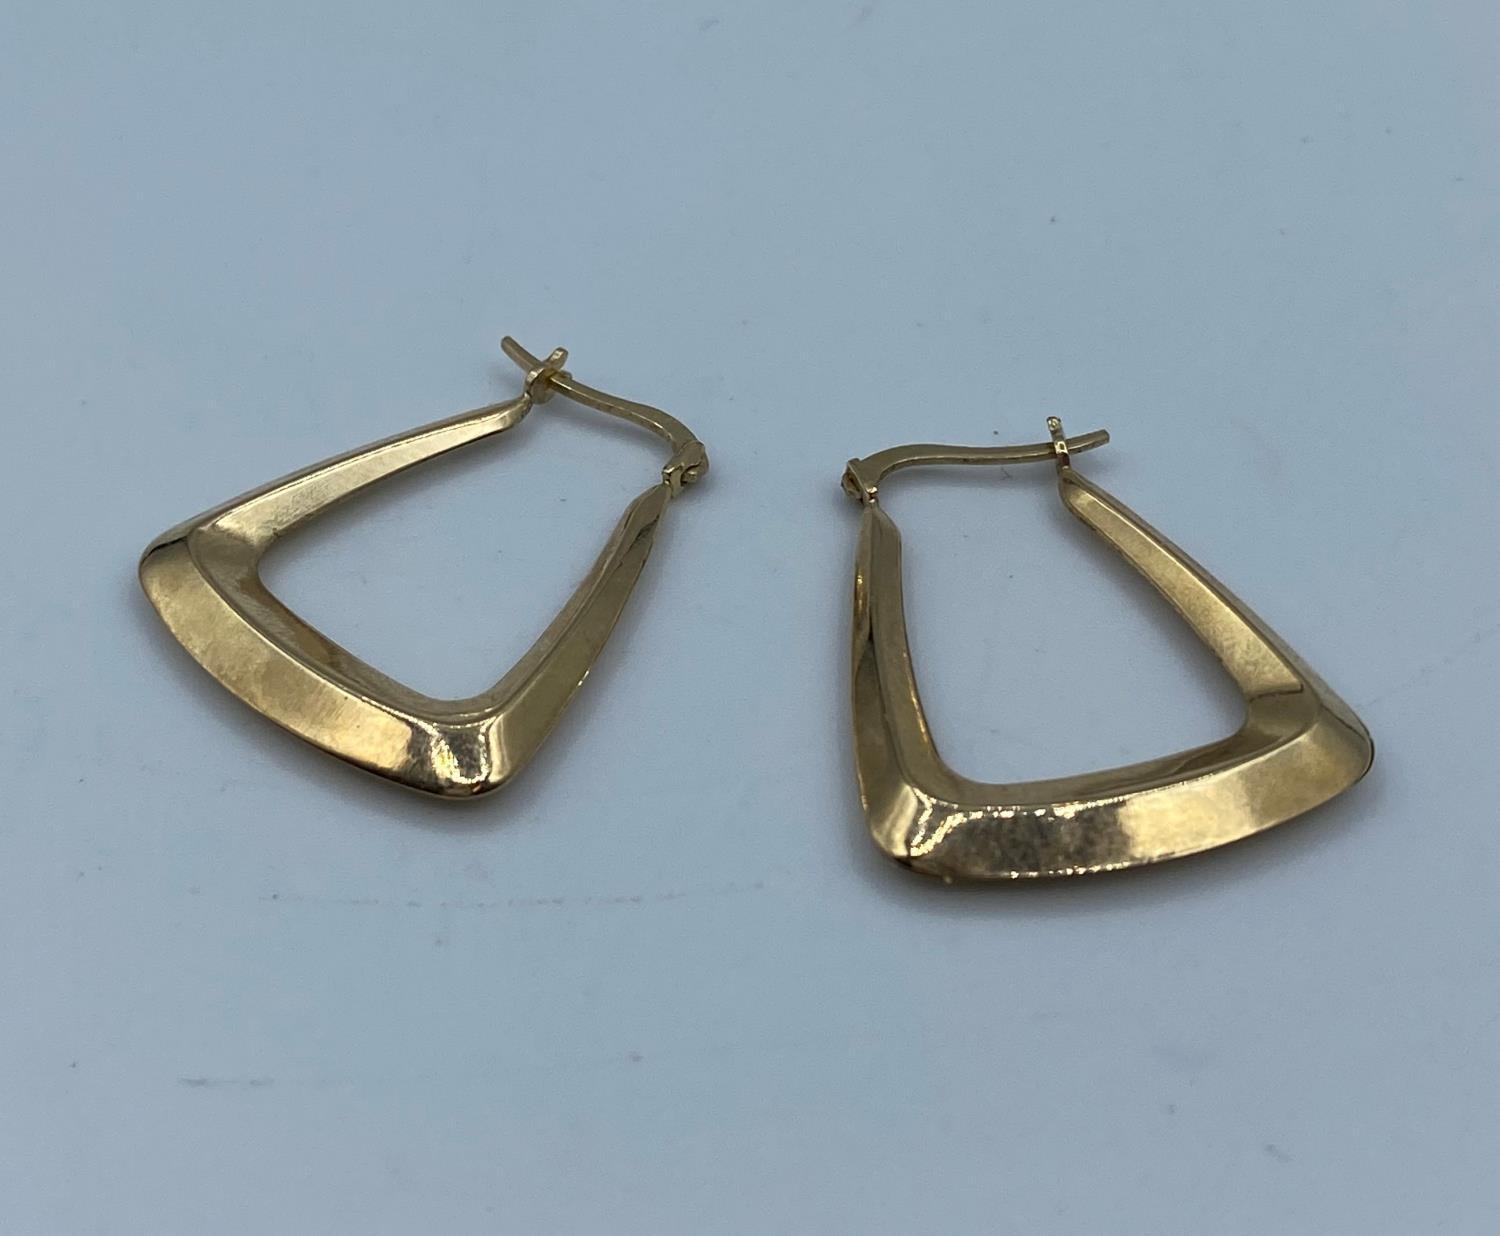 Pair of 9k yellow gold earrings in modern design, weight 1.25g and 3cm long approx